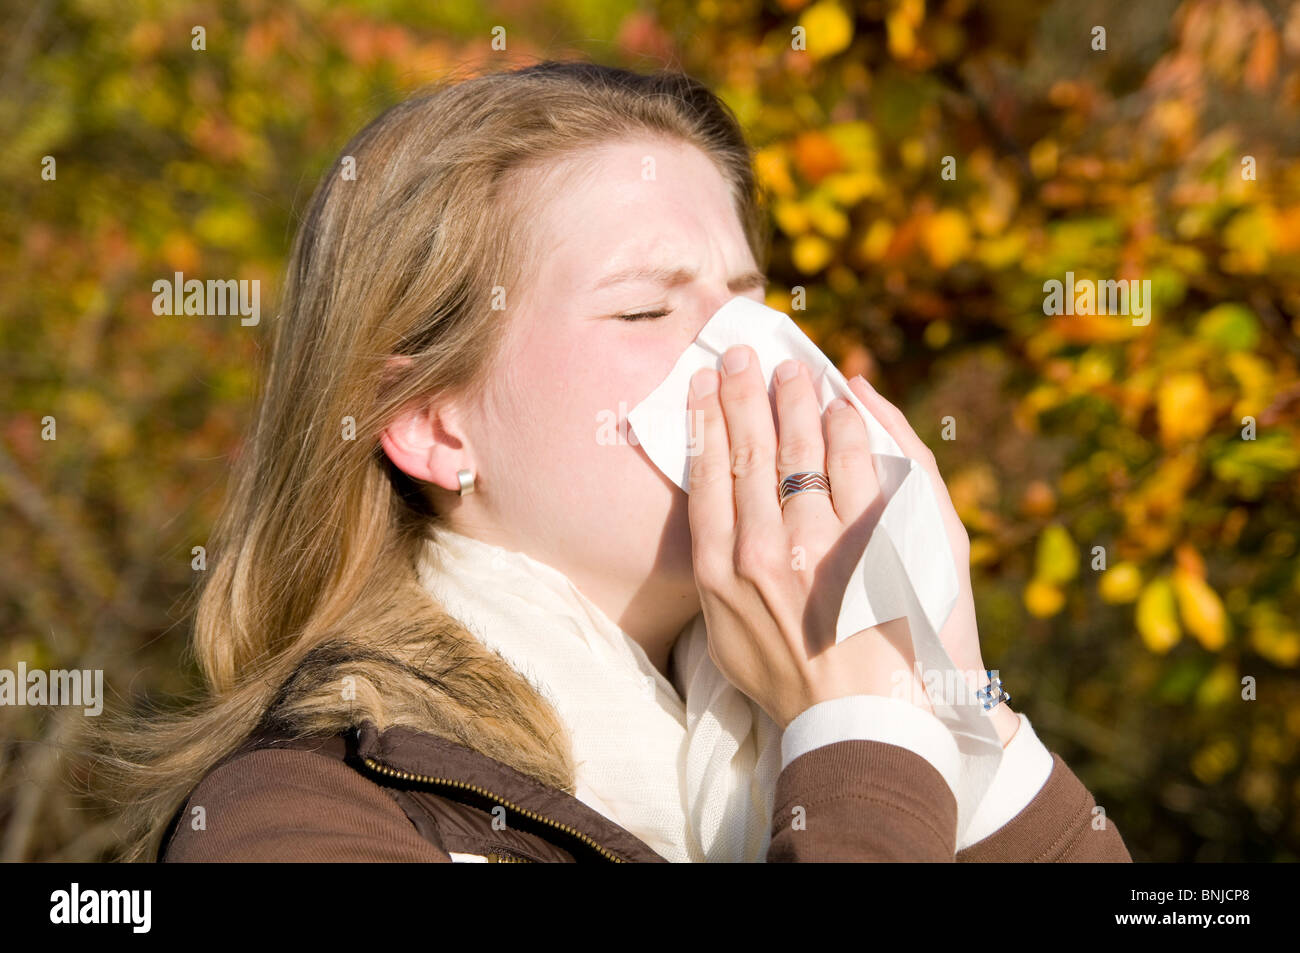 Woman autumn ill sick allergy a cold blond catches cold influenza handkerchief, Stock Photo